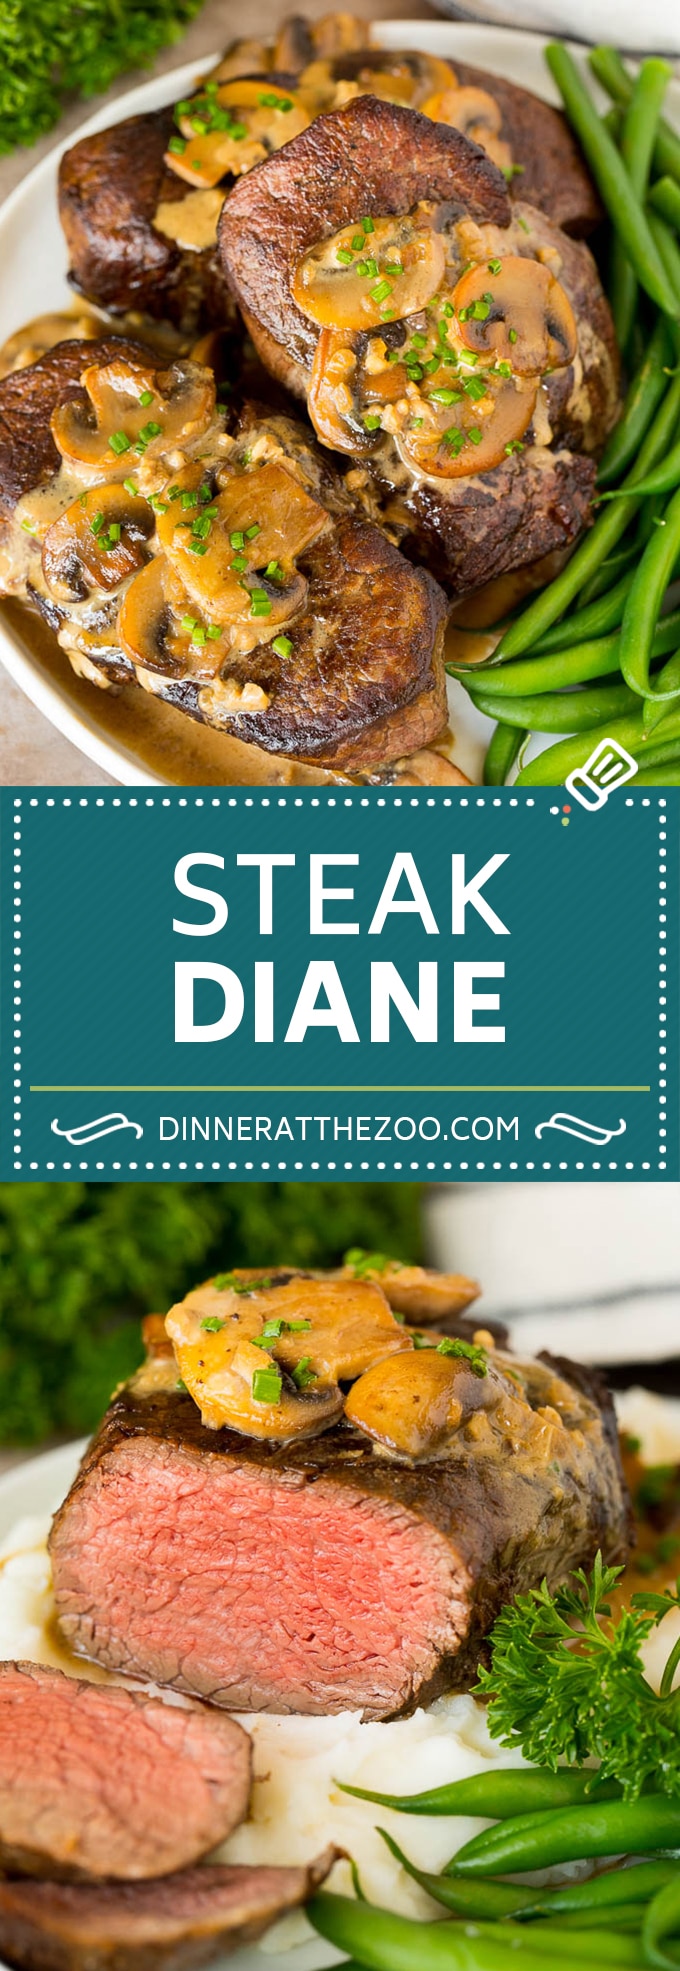 This Steak Diane recipe is beef tenderloin medallions that are seared and coated in a savory mushroom sauce.